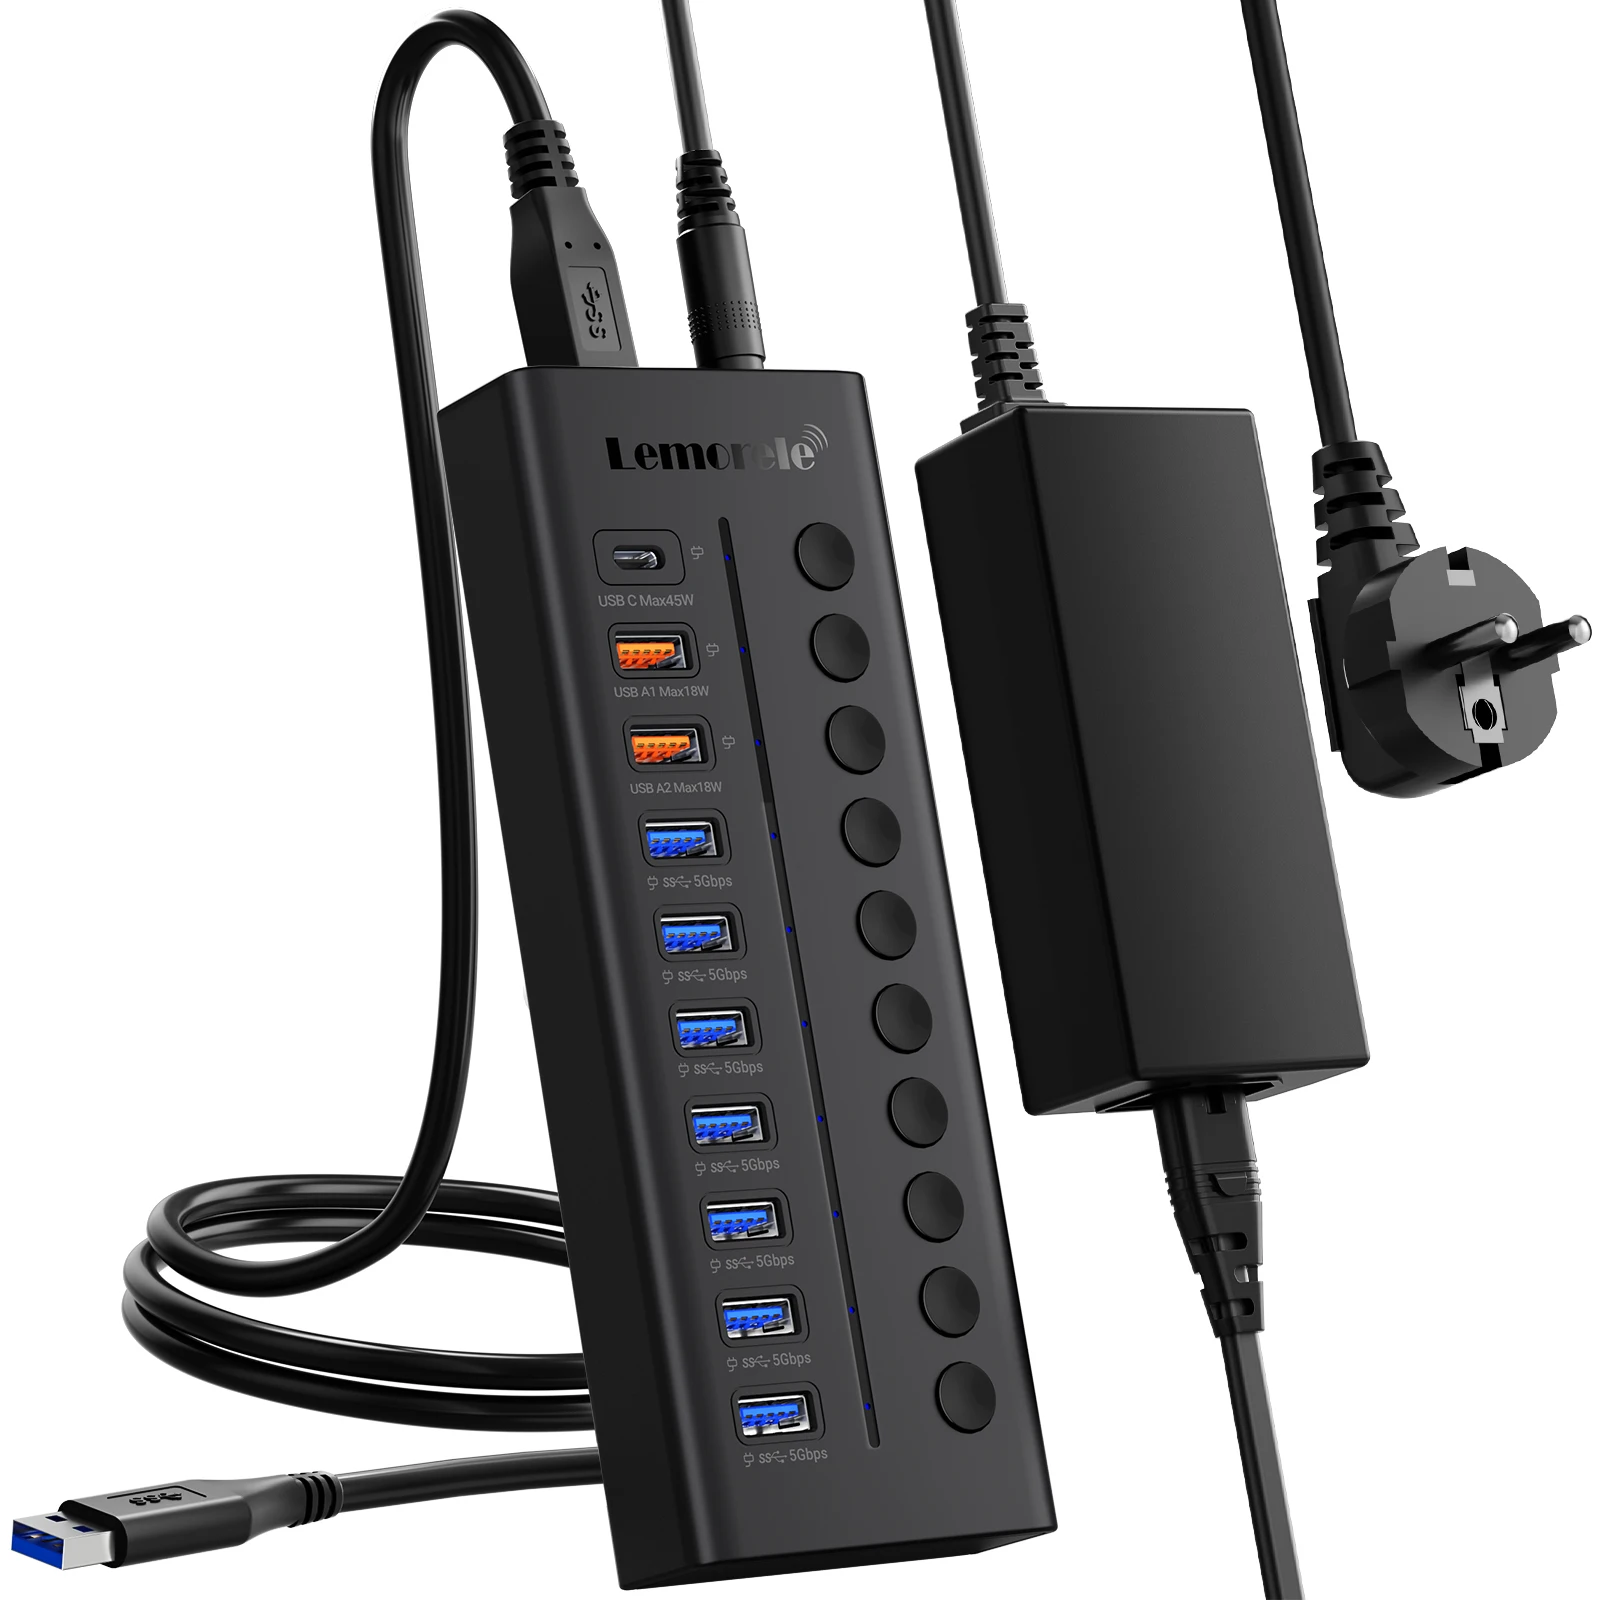 

Lemorele TC120 USB HUB 3 0 USB High Speed Splitter 10 Port 5Gbps Hub Use Power Adapter with Switch Long Cable For Mac OS Windows